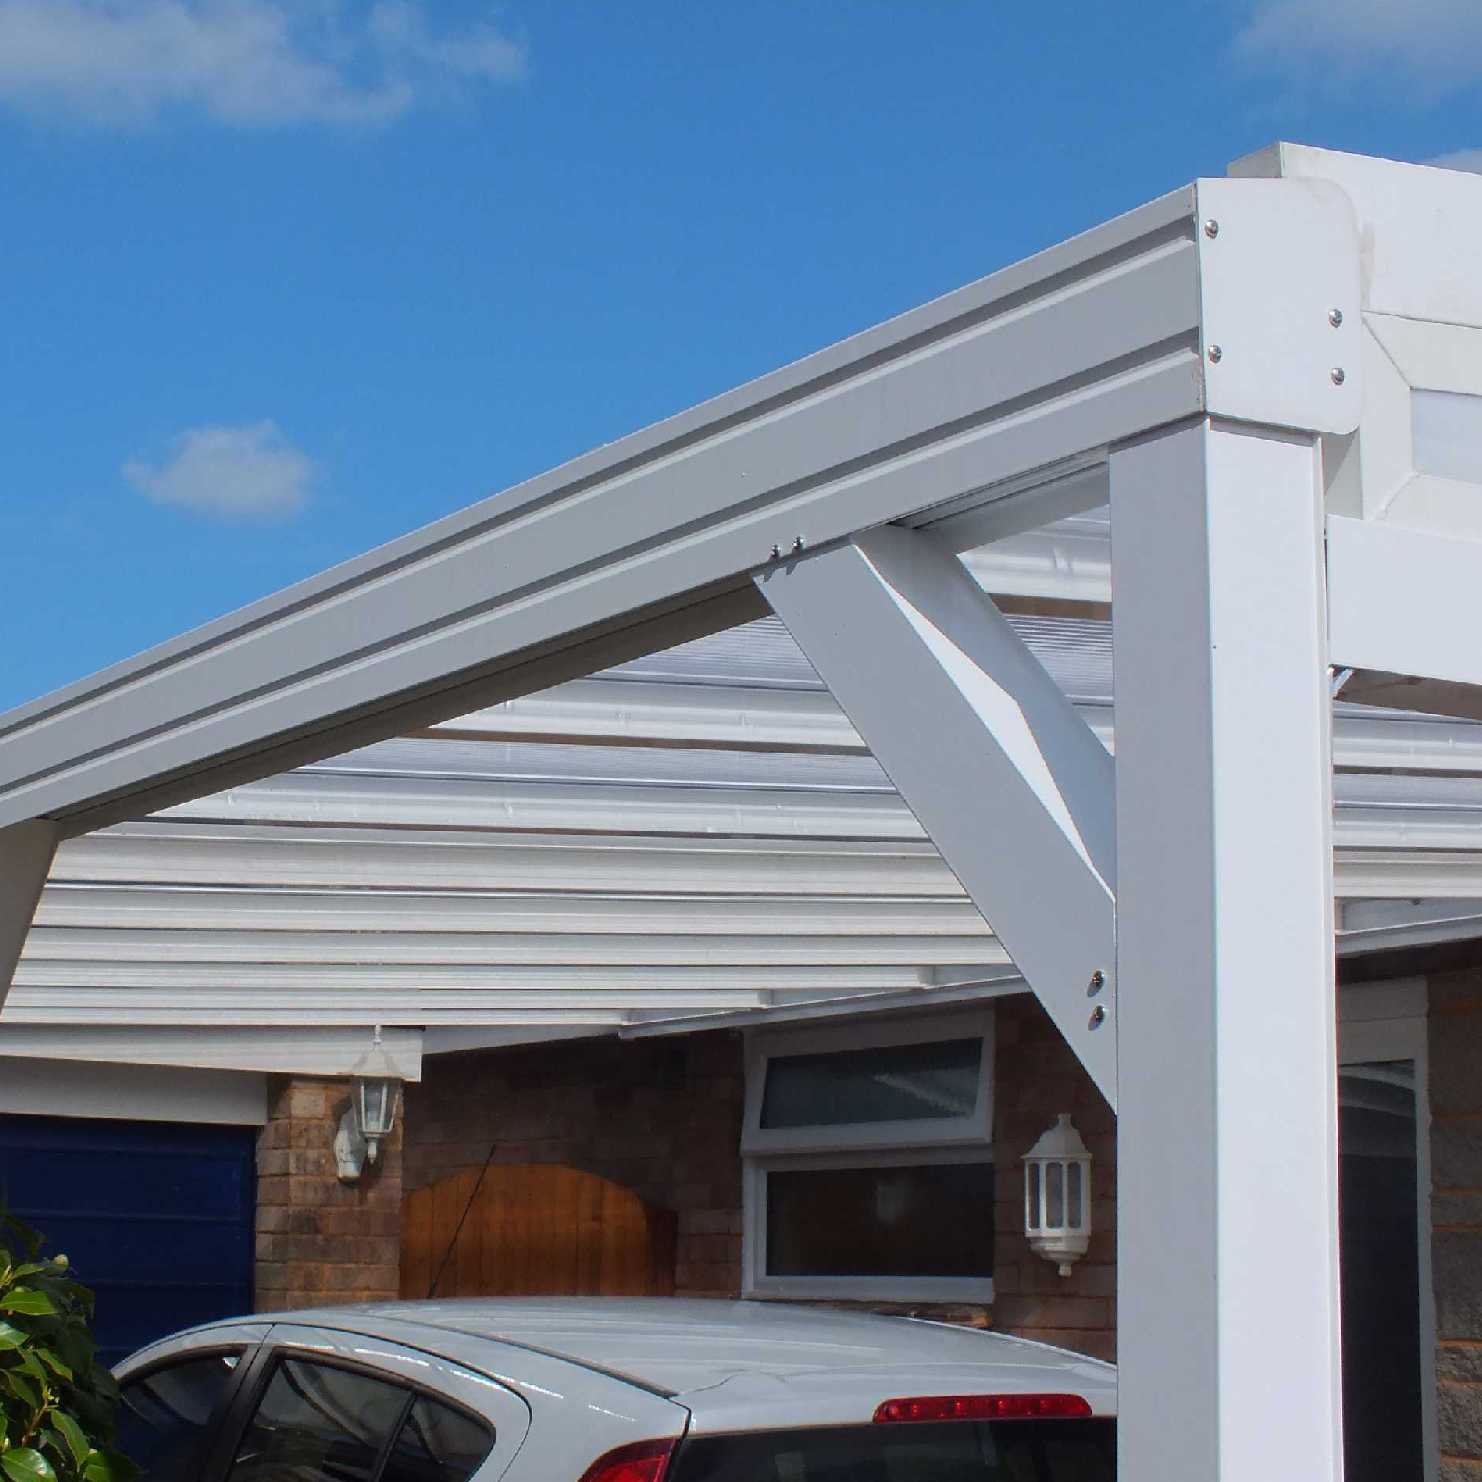 Buy Omega Smart Lean-To Canopy, White with 16mm Polycarbonate Glazing - 7.8m (W) x 4.0m (P), (4) Supporting Posts online today